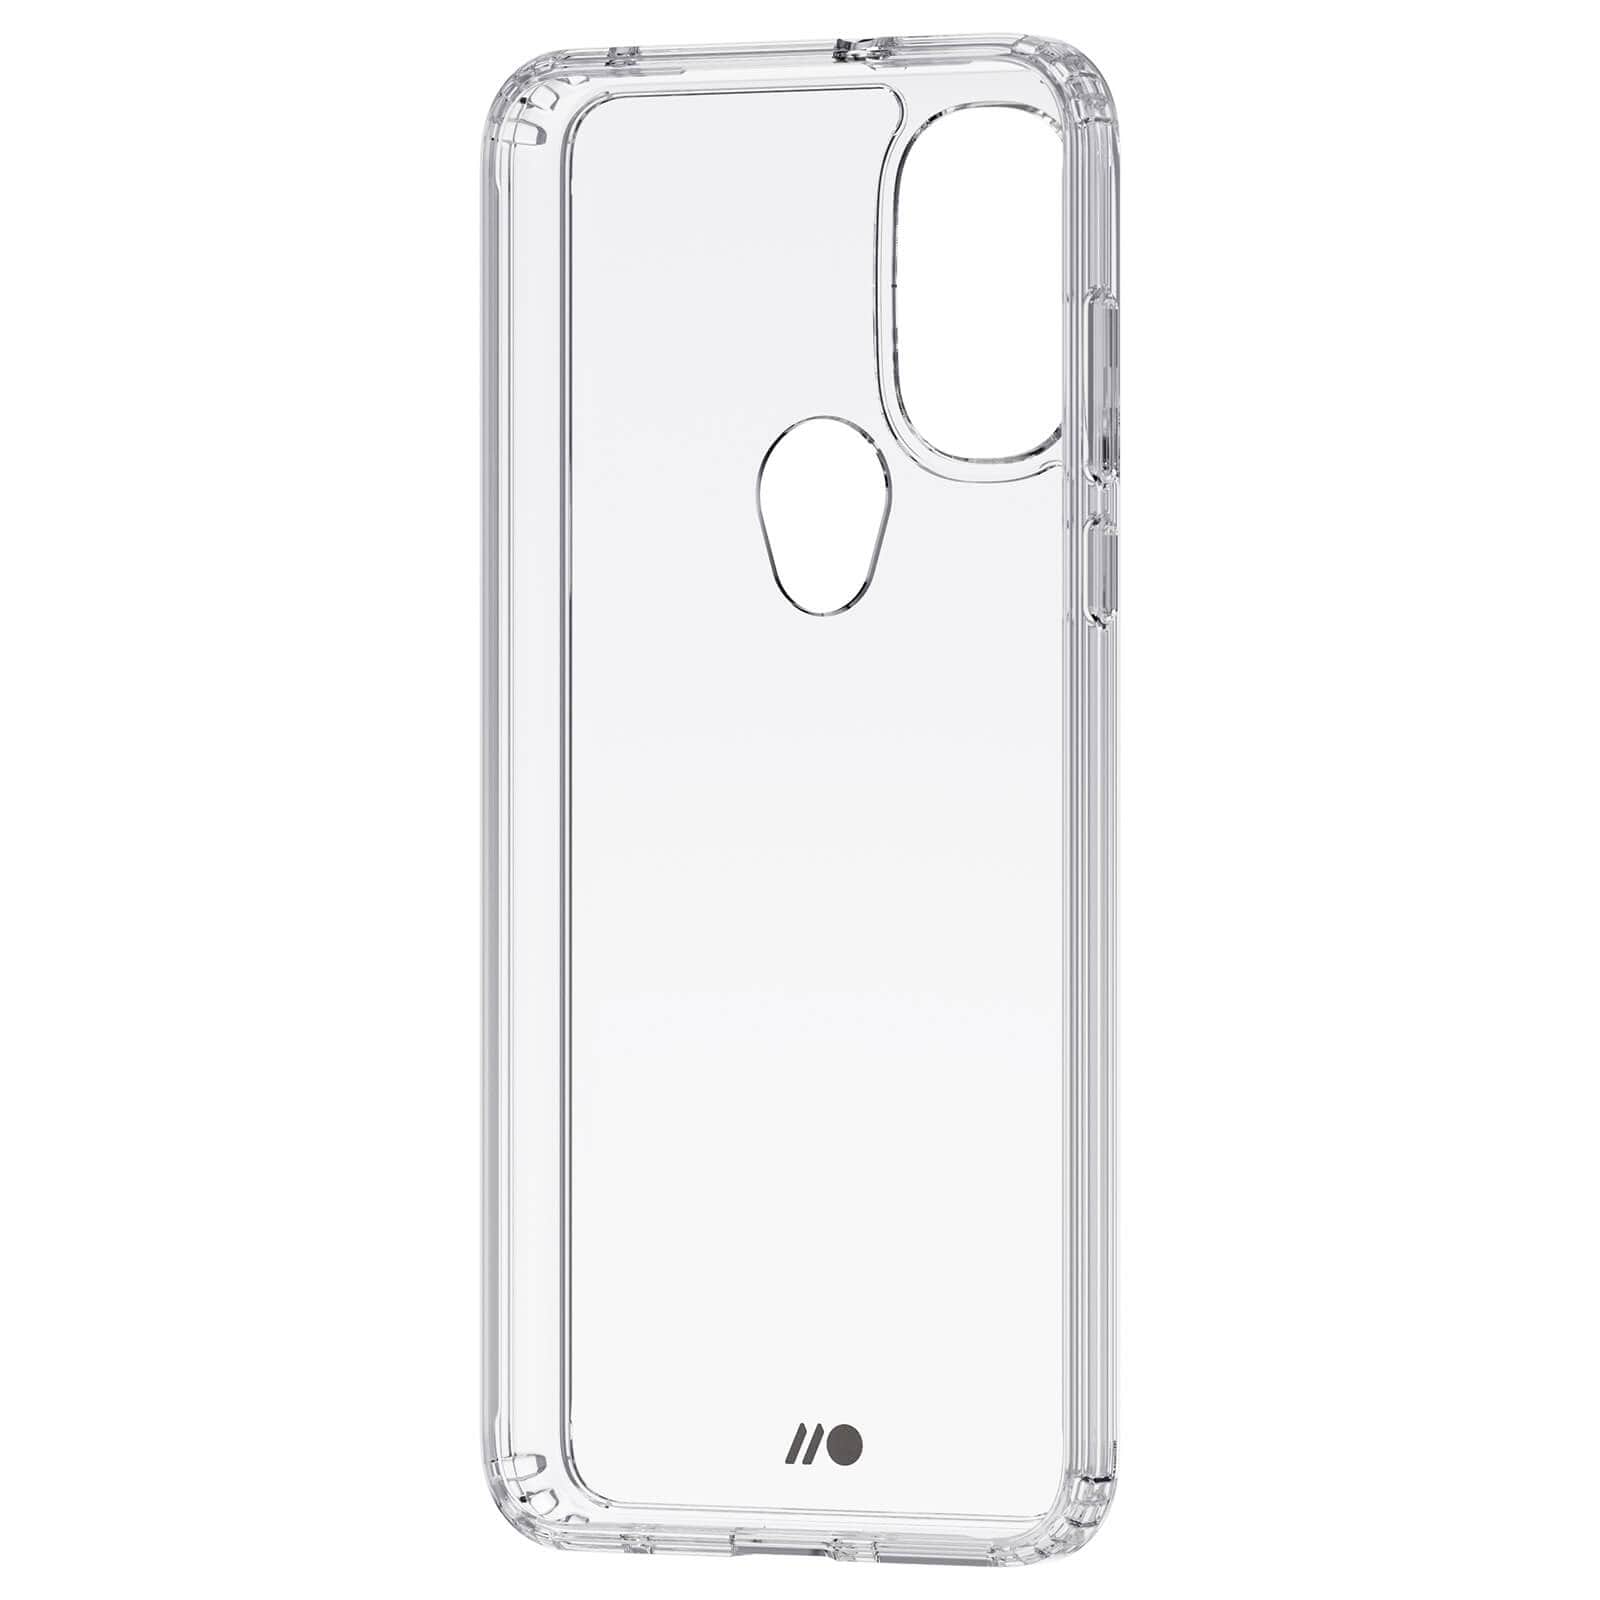 Inside of case without phone. color::Clear